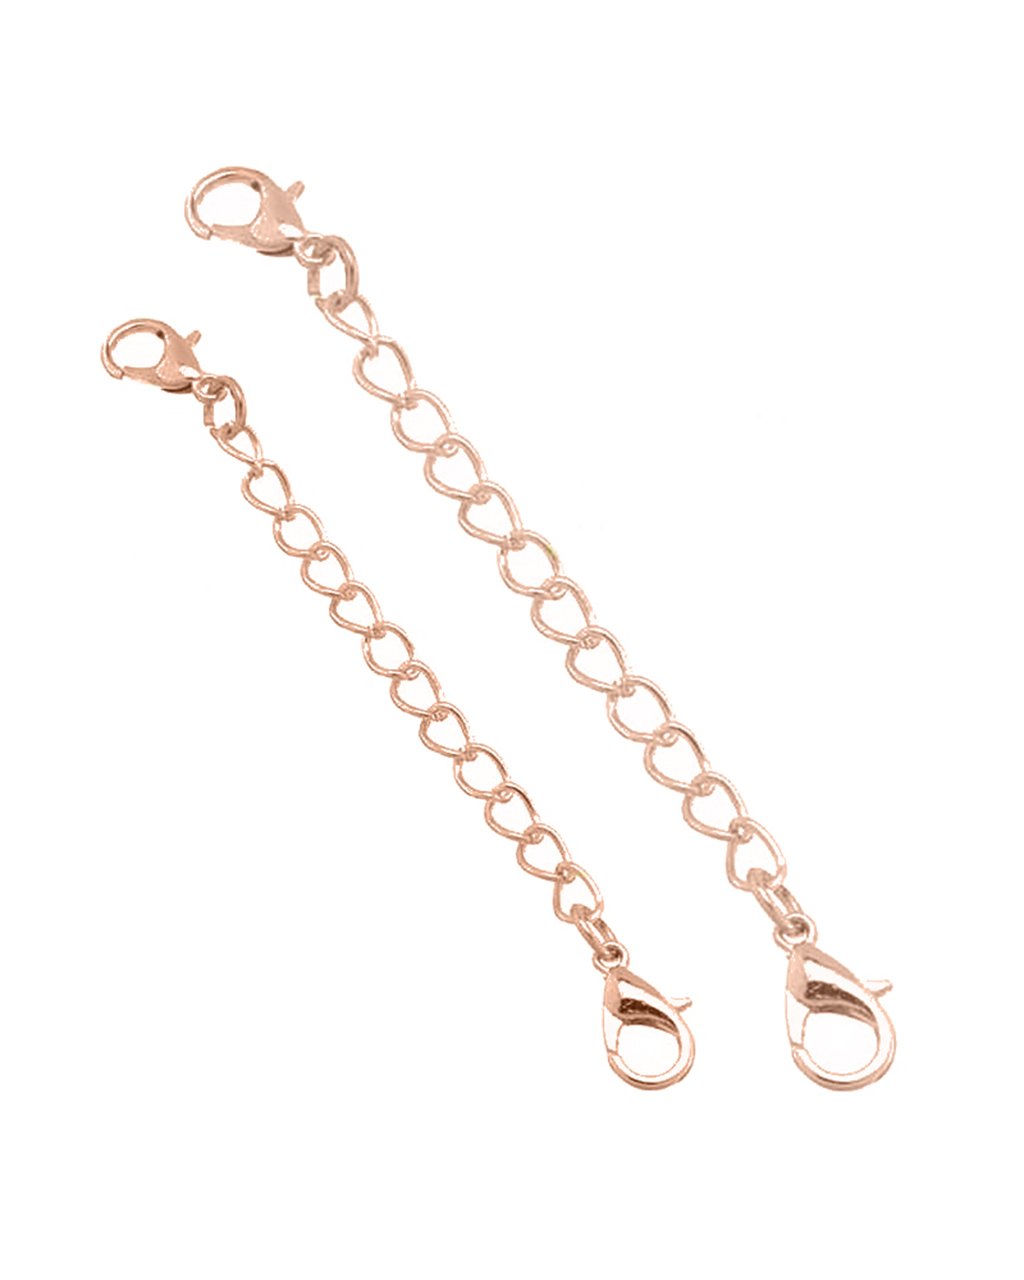 VANBARIS 925 Sterling Silver Necklace Extender Rose Gold Necklace Extender Rose Gold Chain Extenders for Necklaces 2, 3, 4 Inches